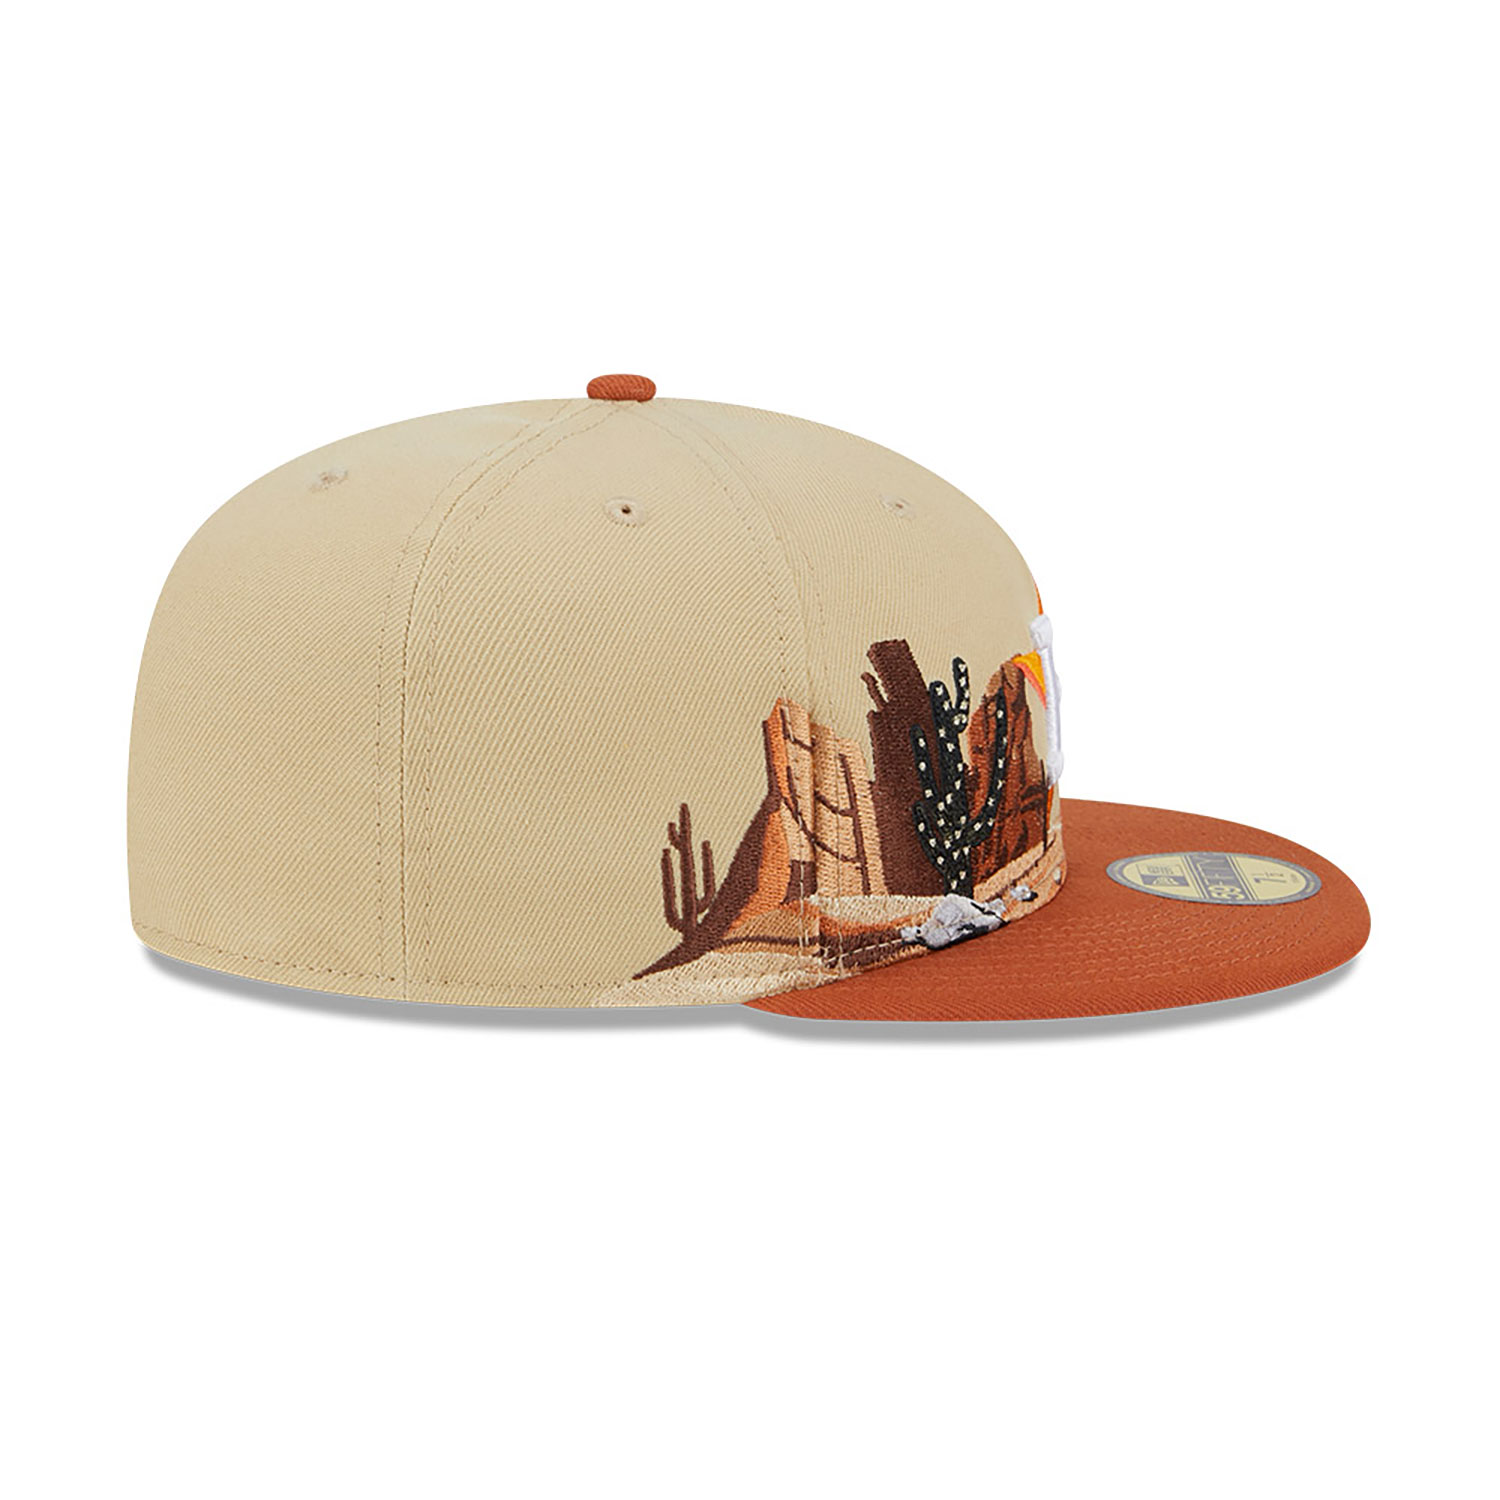 Houston Astros Team Landscape Light Beige 59FIFTY Fitted Cap